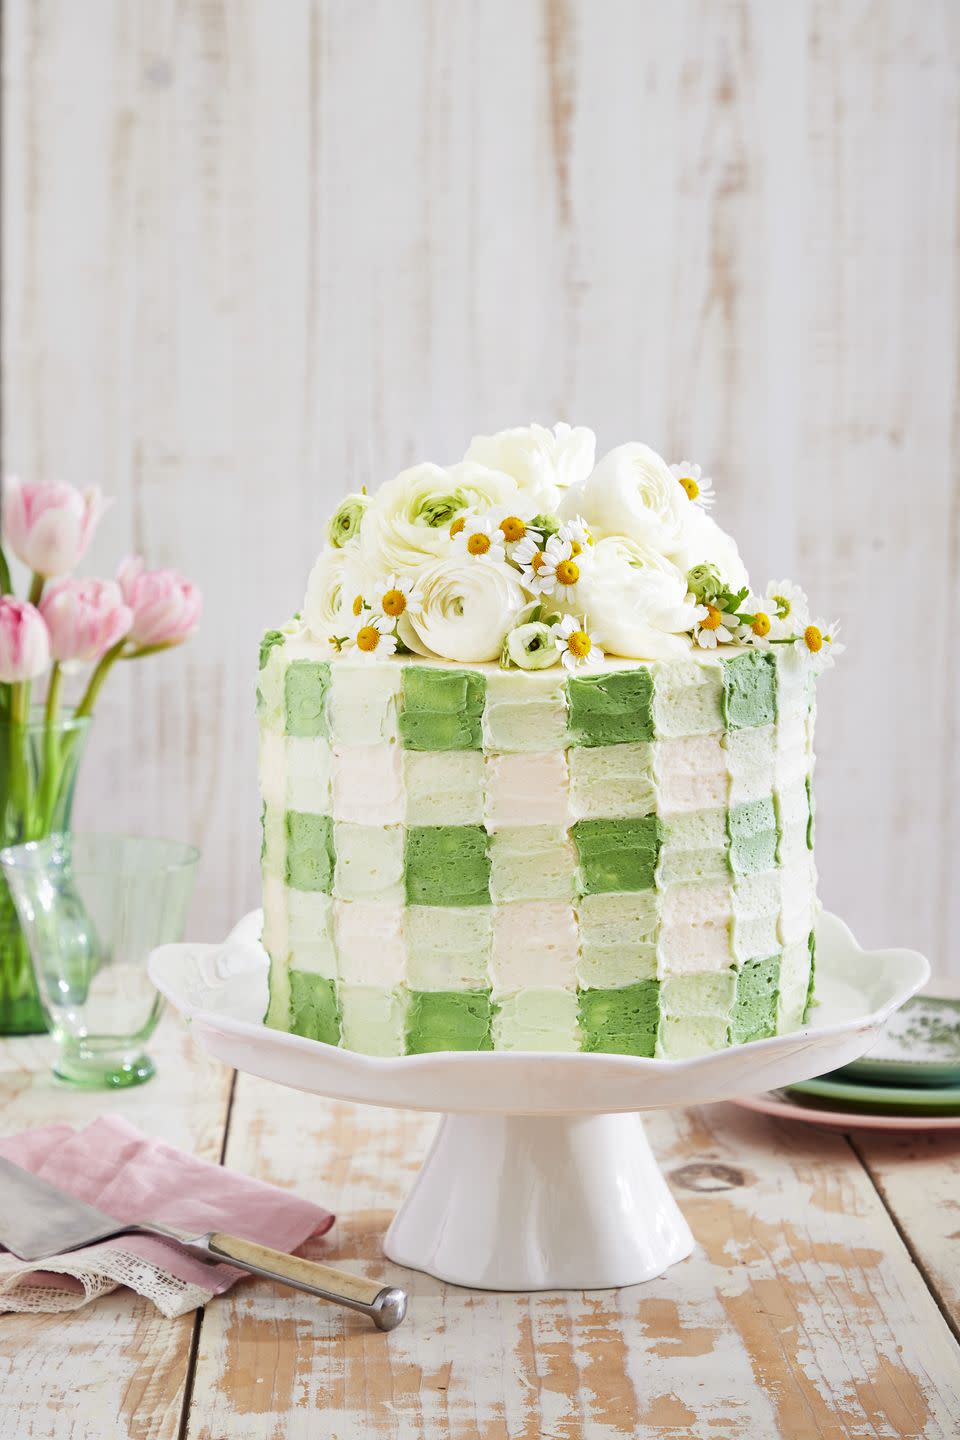 coconut cream cake with light green gingham patterned frosting and fresh white flowers on top